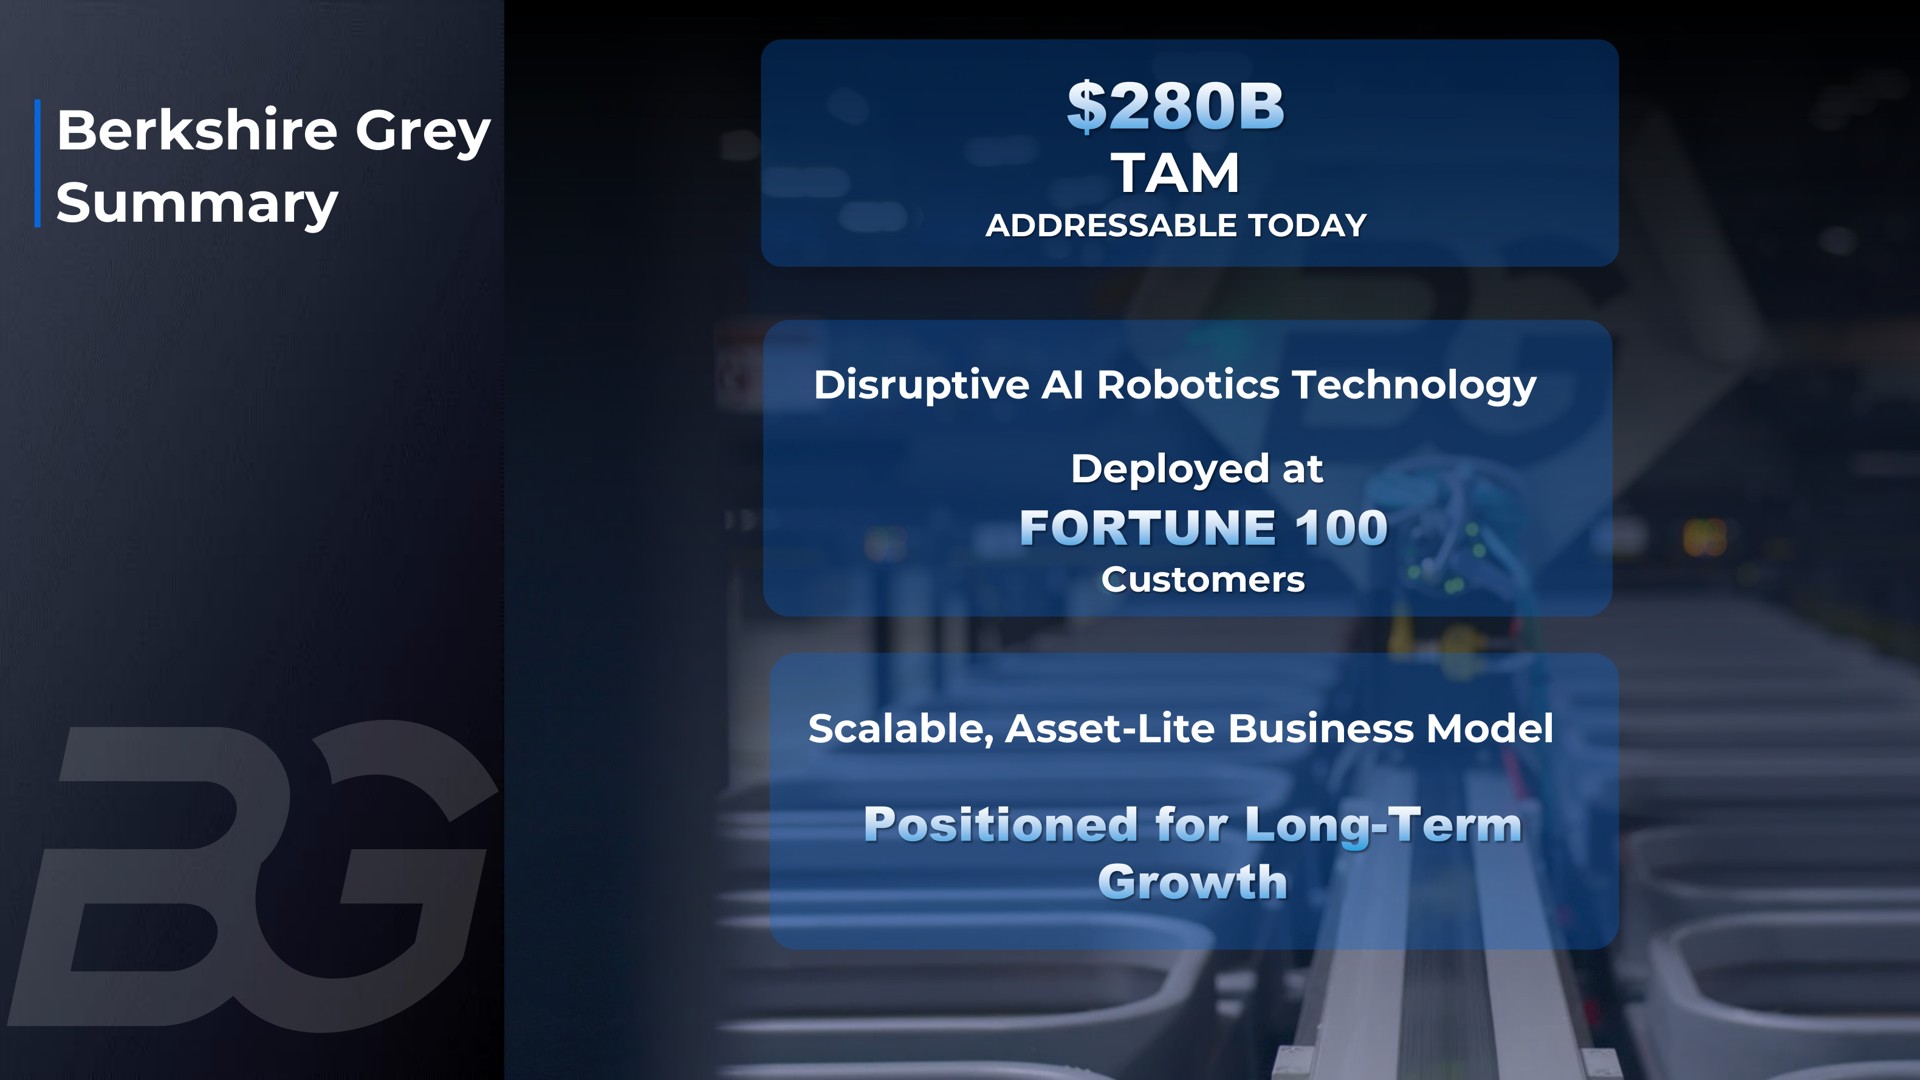 grey summary tam disruptive technology deployed at scalable asset lite business model fortune positioned for long term growth i | Berkshire Grey